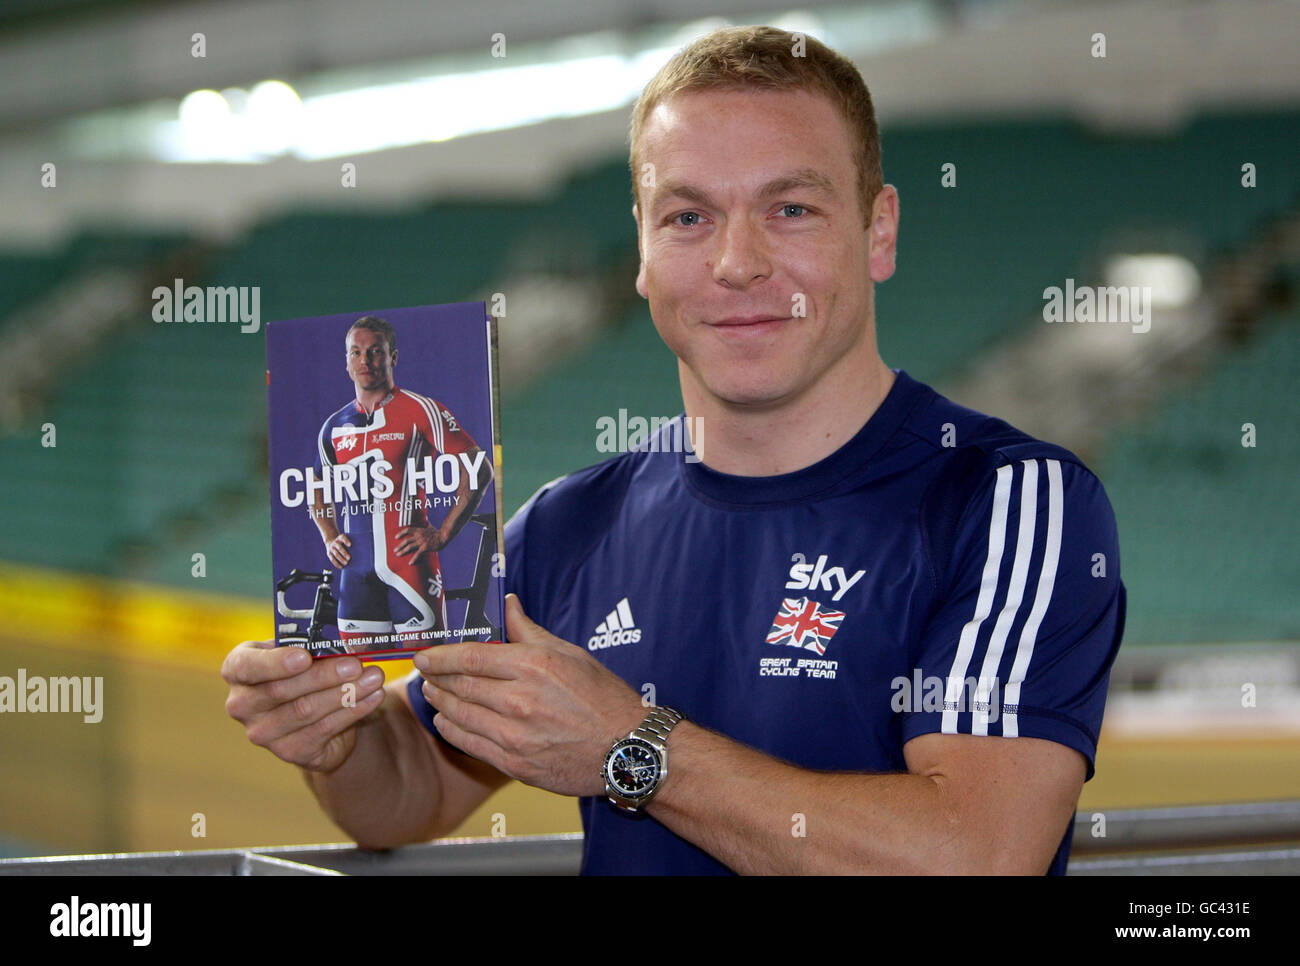 Cycling - Launch of Chris Hoy's Autobiography - Manchester Velodrome Stock Photo